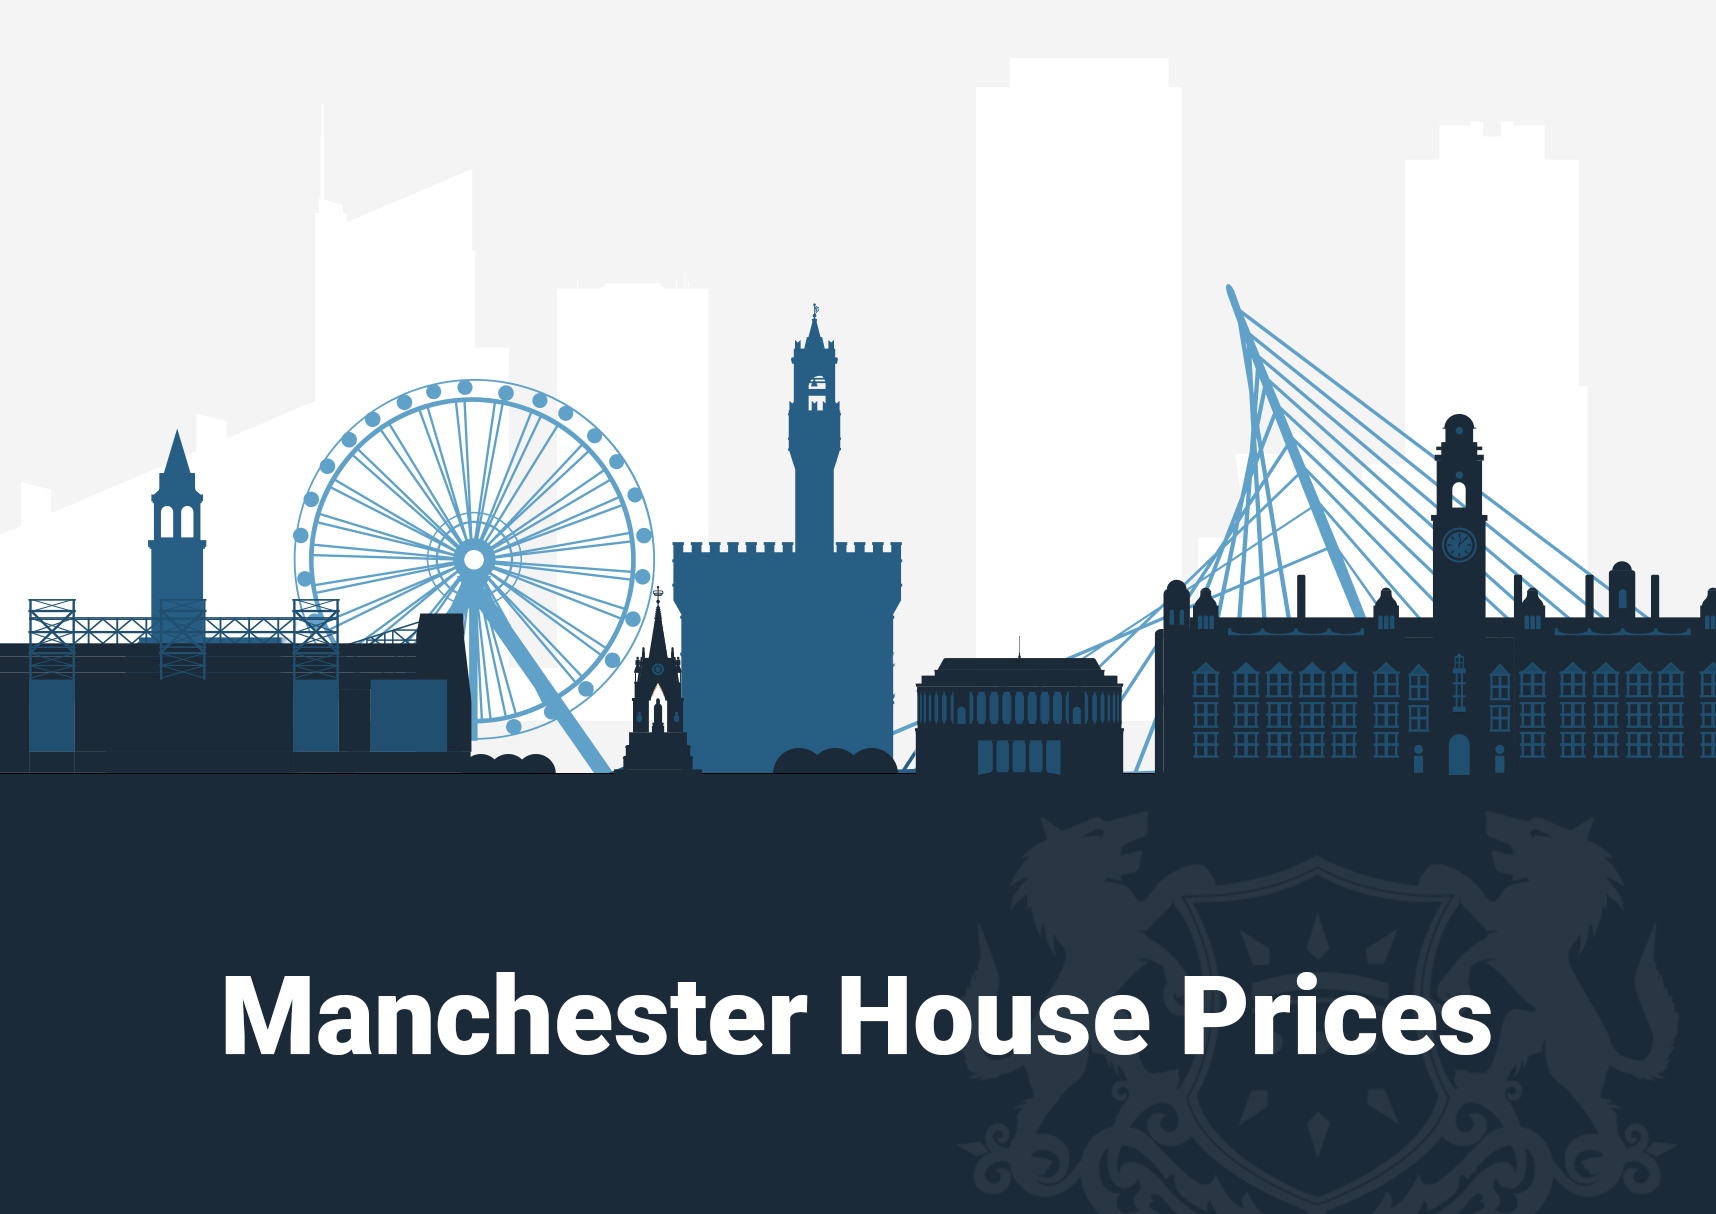 Manchester House Prices: Analysis of Trends and Predictions